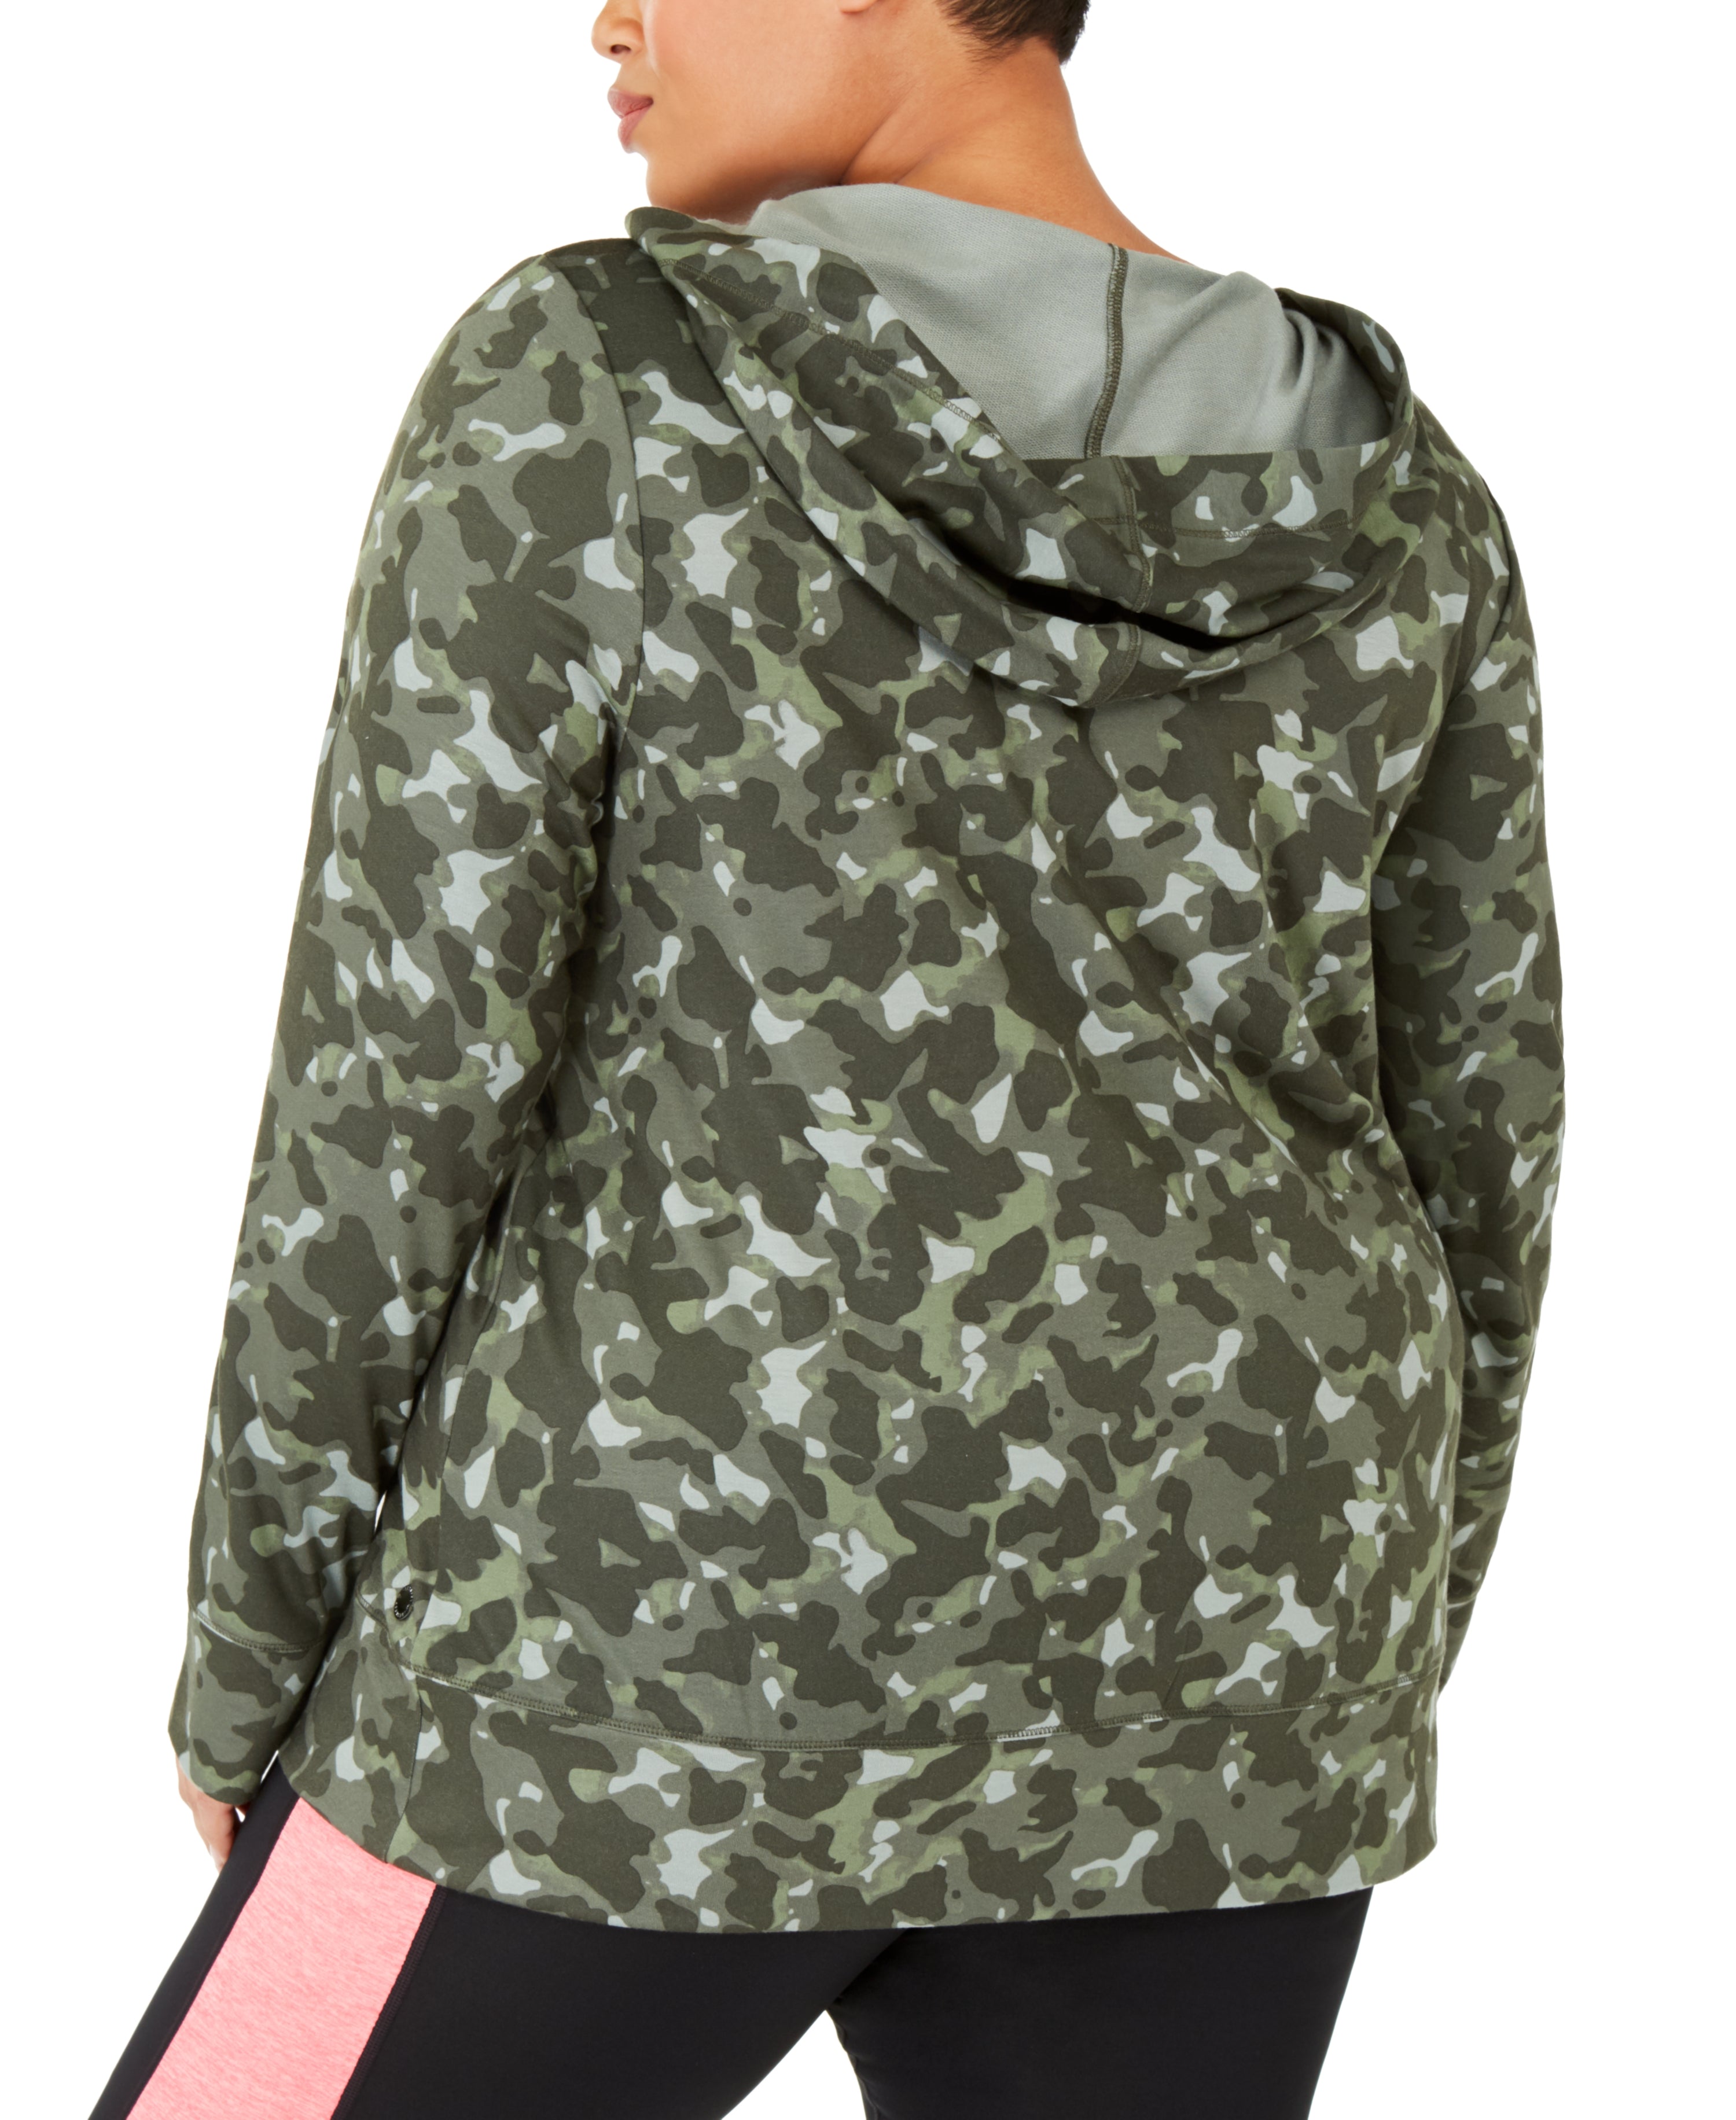 Ideology Womens Plus Size Camouflage Lace Up Hoodie